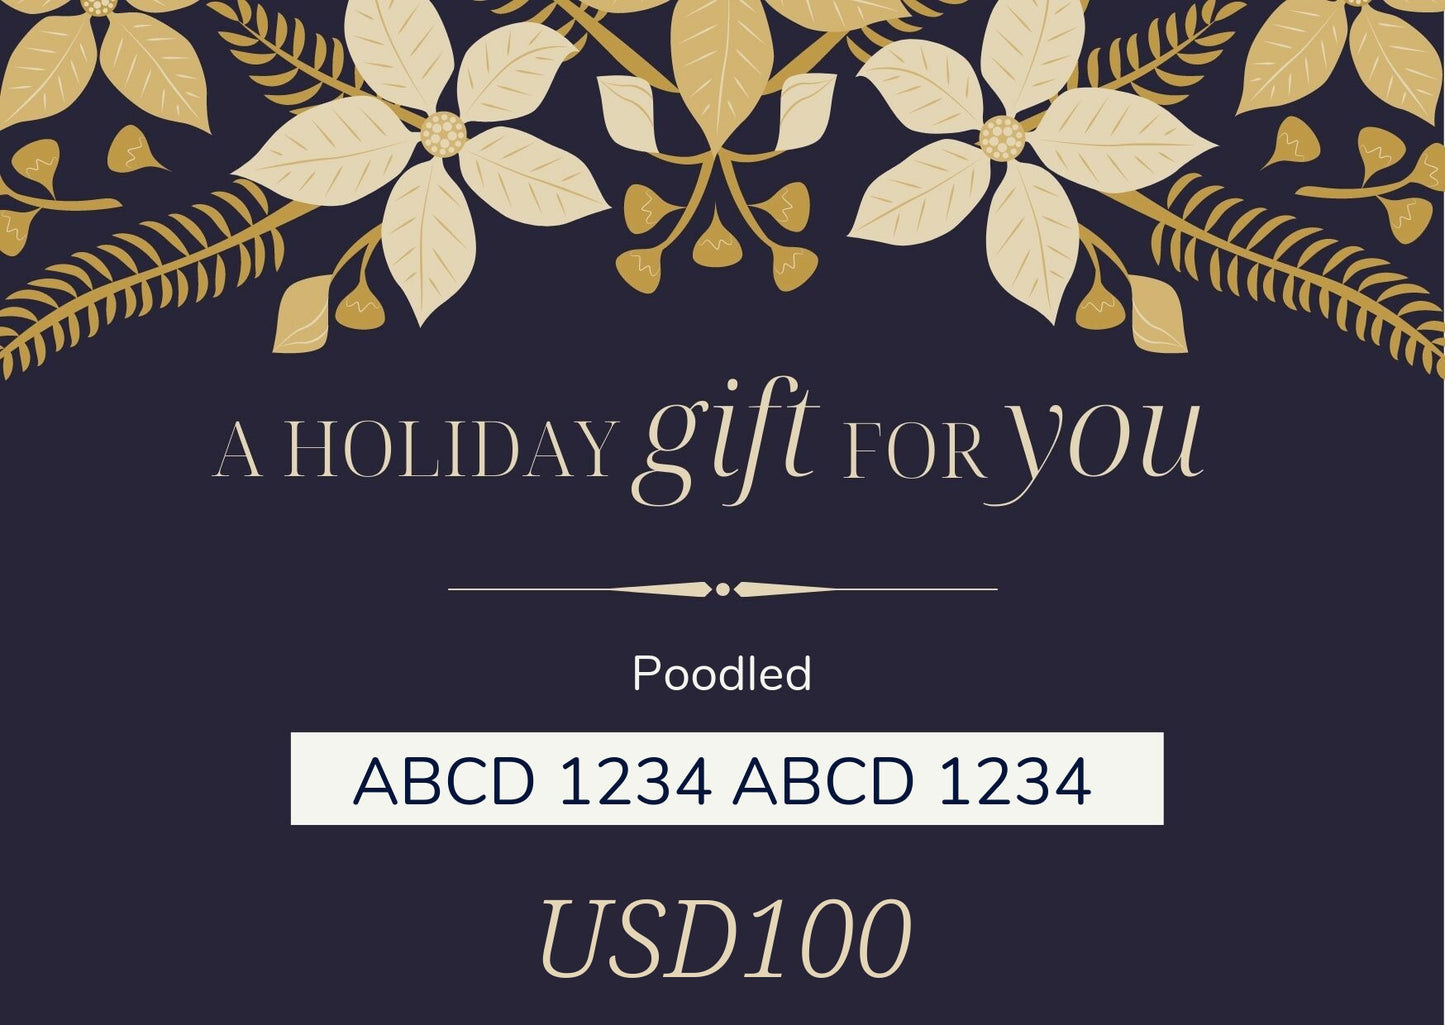 Gift Card - USD100 - Poodled